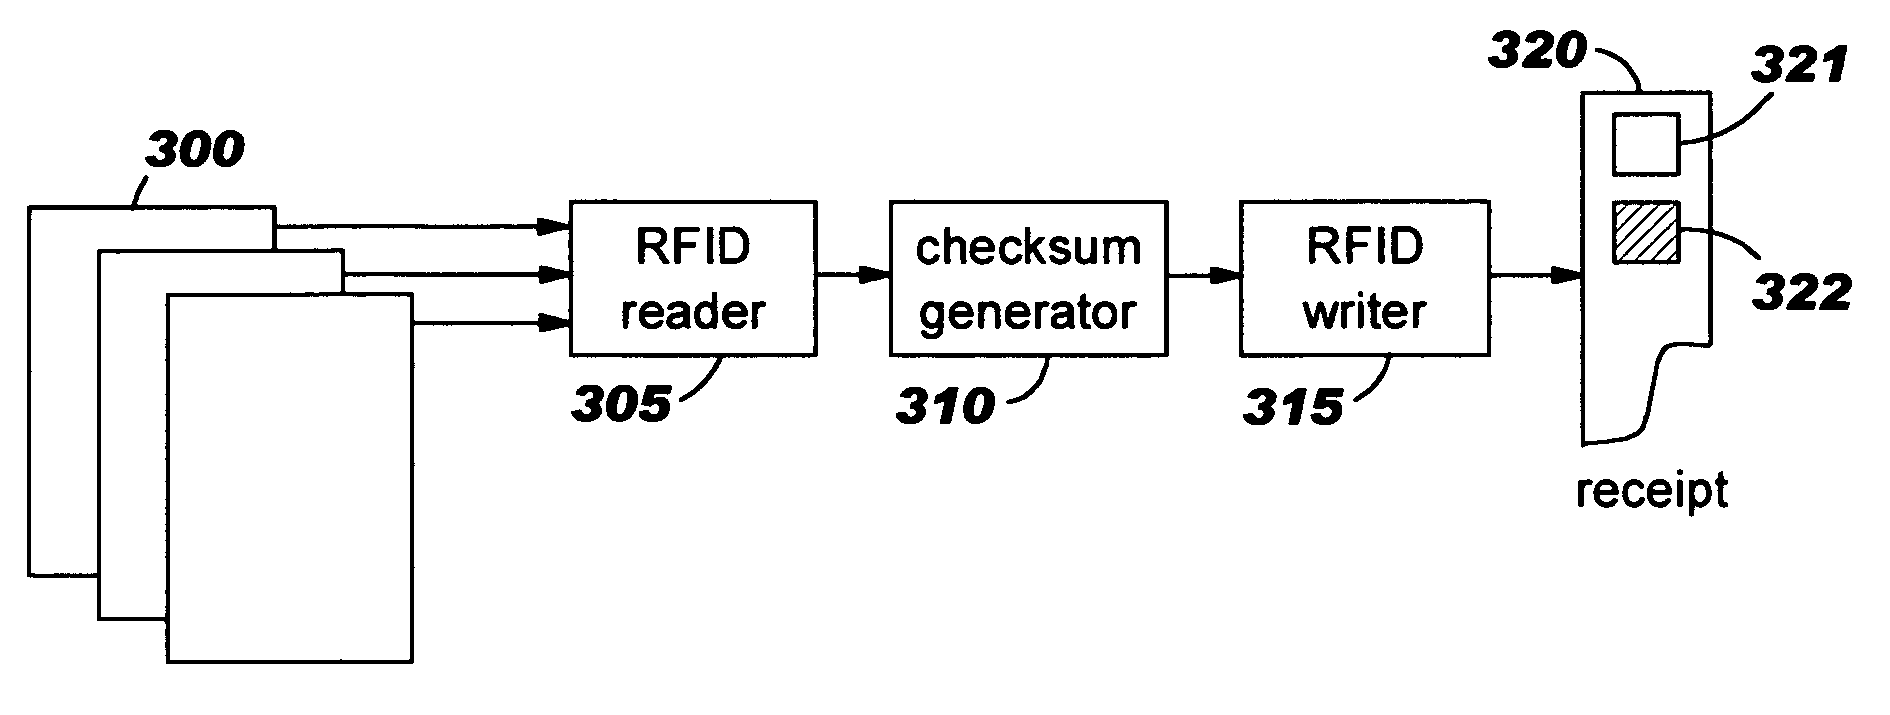 Using radio frequency identification with transaction-specific correlator values written on transaction receipts to detect and/or prevent theft and shoplifting